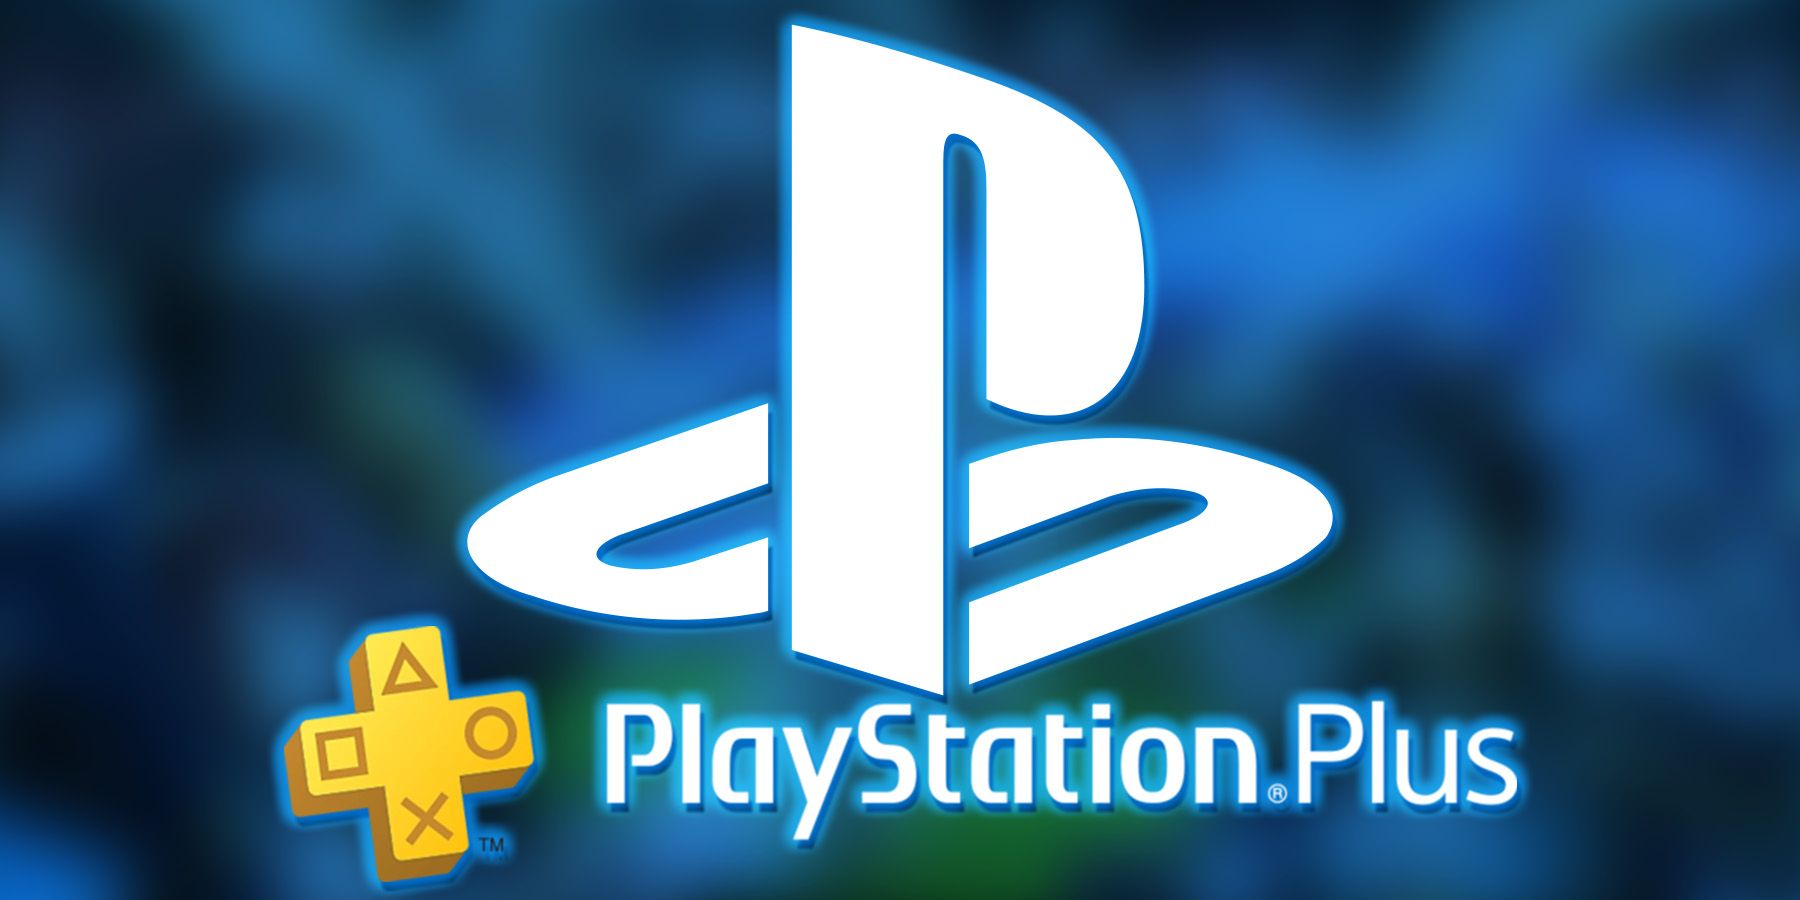 PlayStation emblem above PS Plus logo on blurred Warriors All-Stars promo screenshot with blue multiply filter